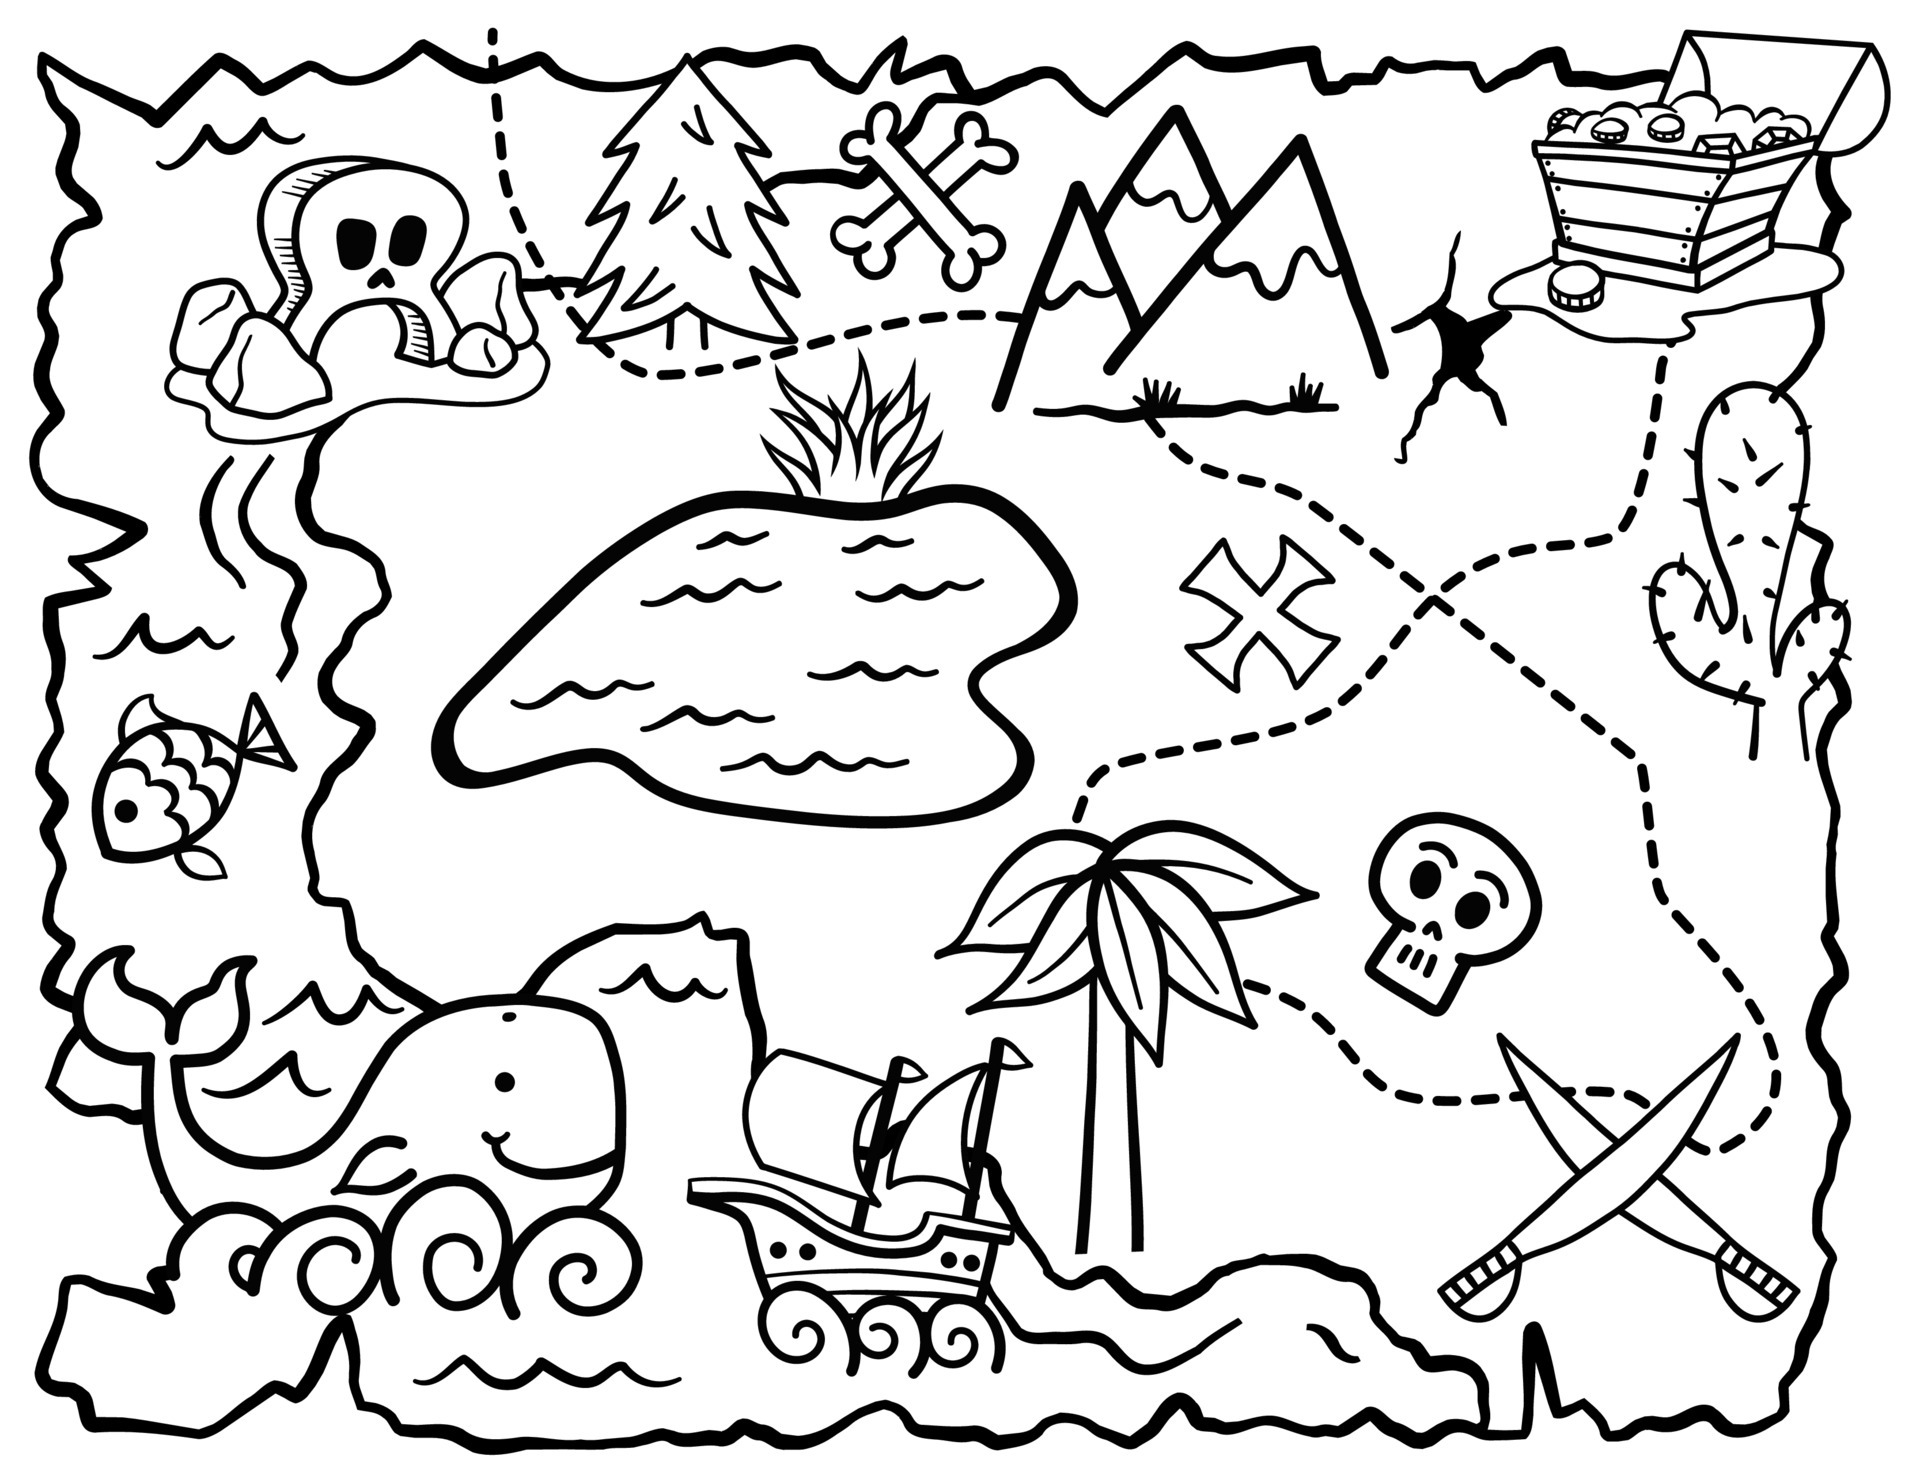 Map for Kids Black and White